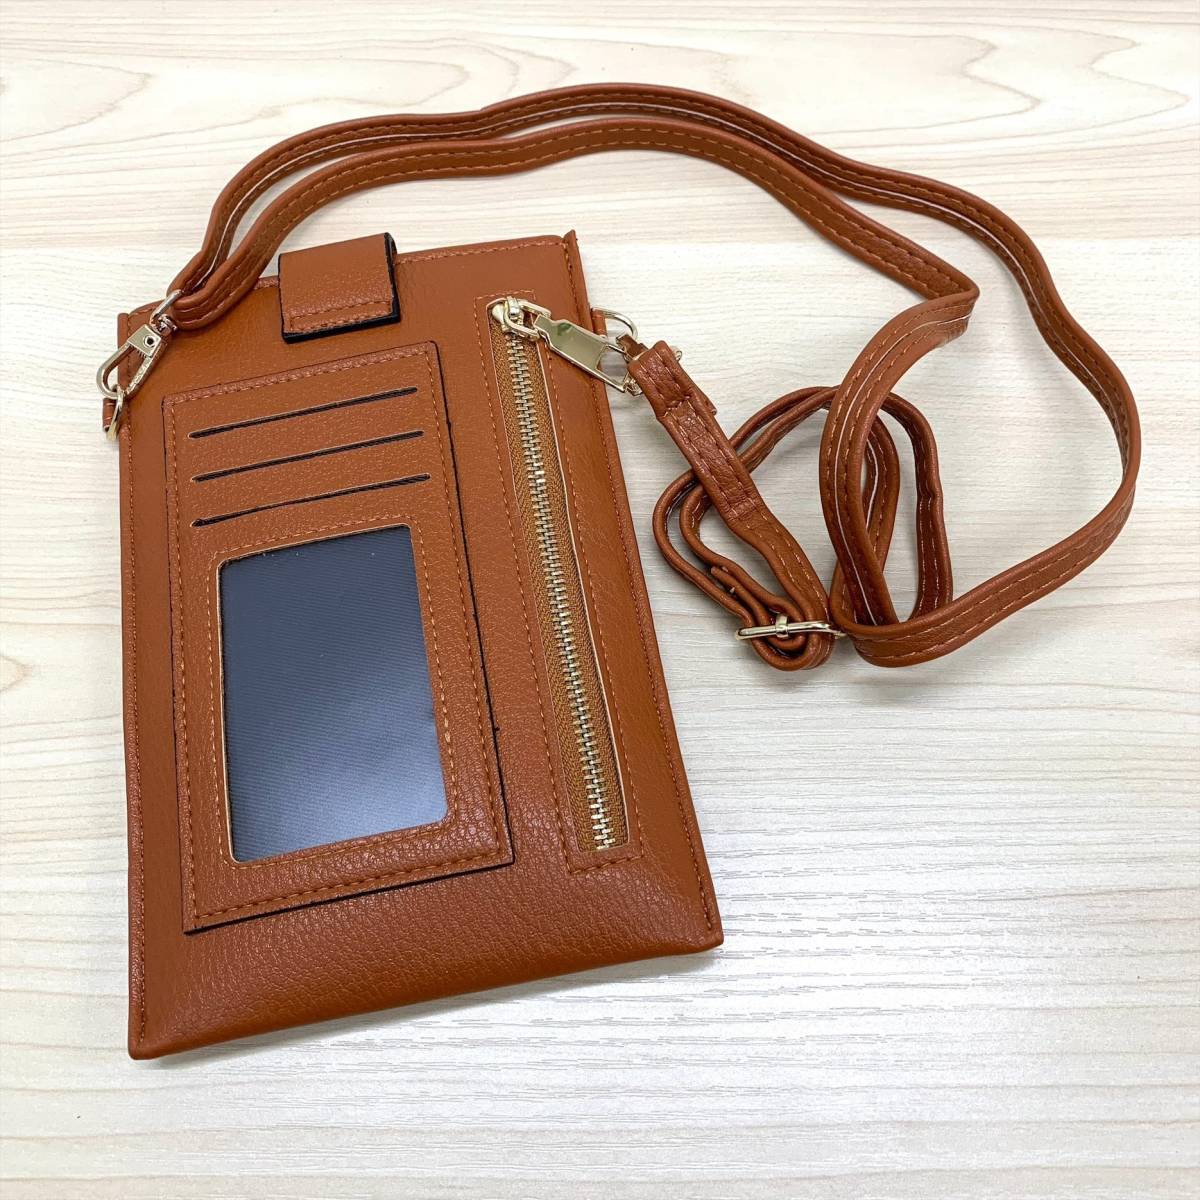  vertical smartphone pouch smartphone shoulder purse shoulder bag Mini shoulder smartphone pochette new goods free shipping Brown pouch [KK30]